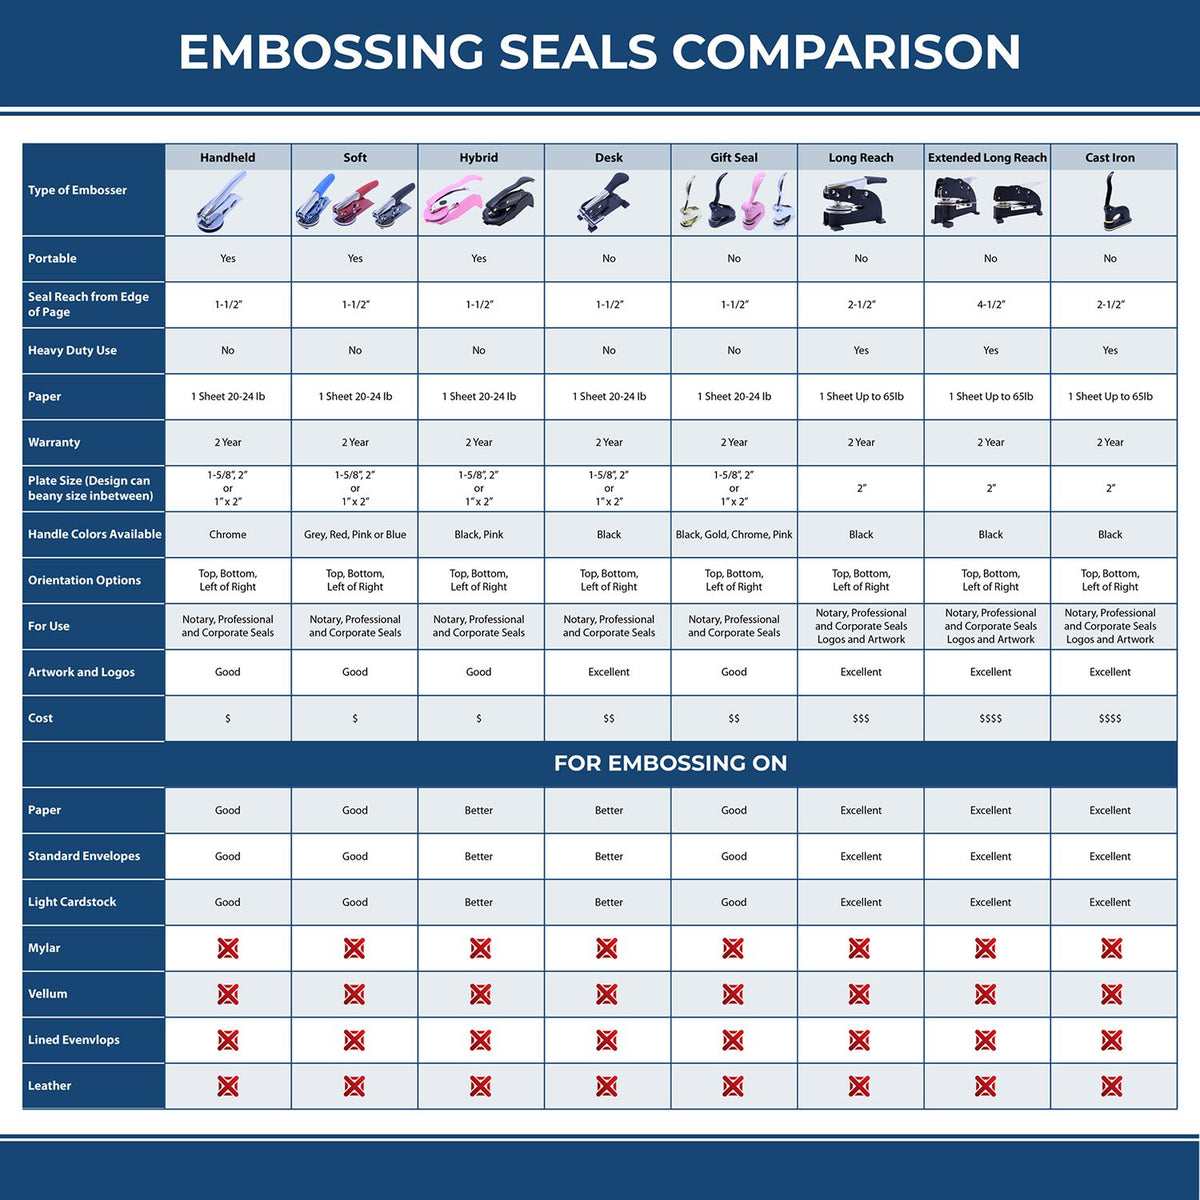 A comparison chart for the different types of mount models available for the Heavy Duty Cast Iron Texas Geologist Seal Embosser